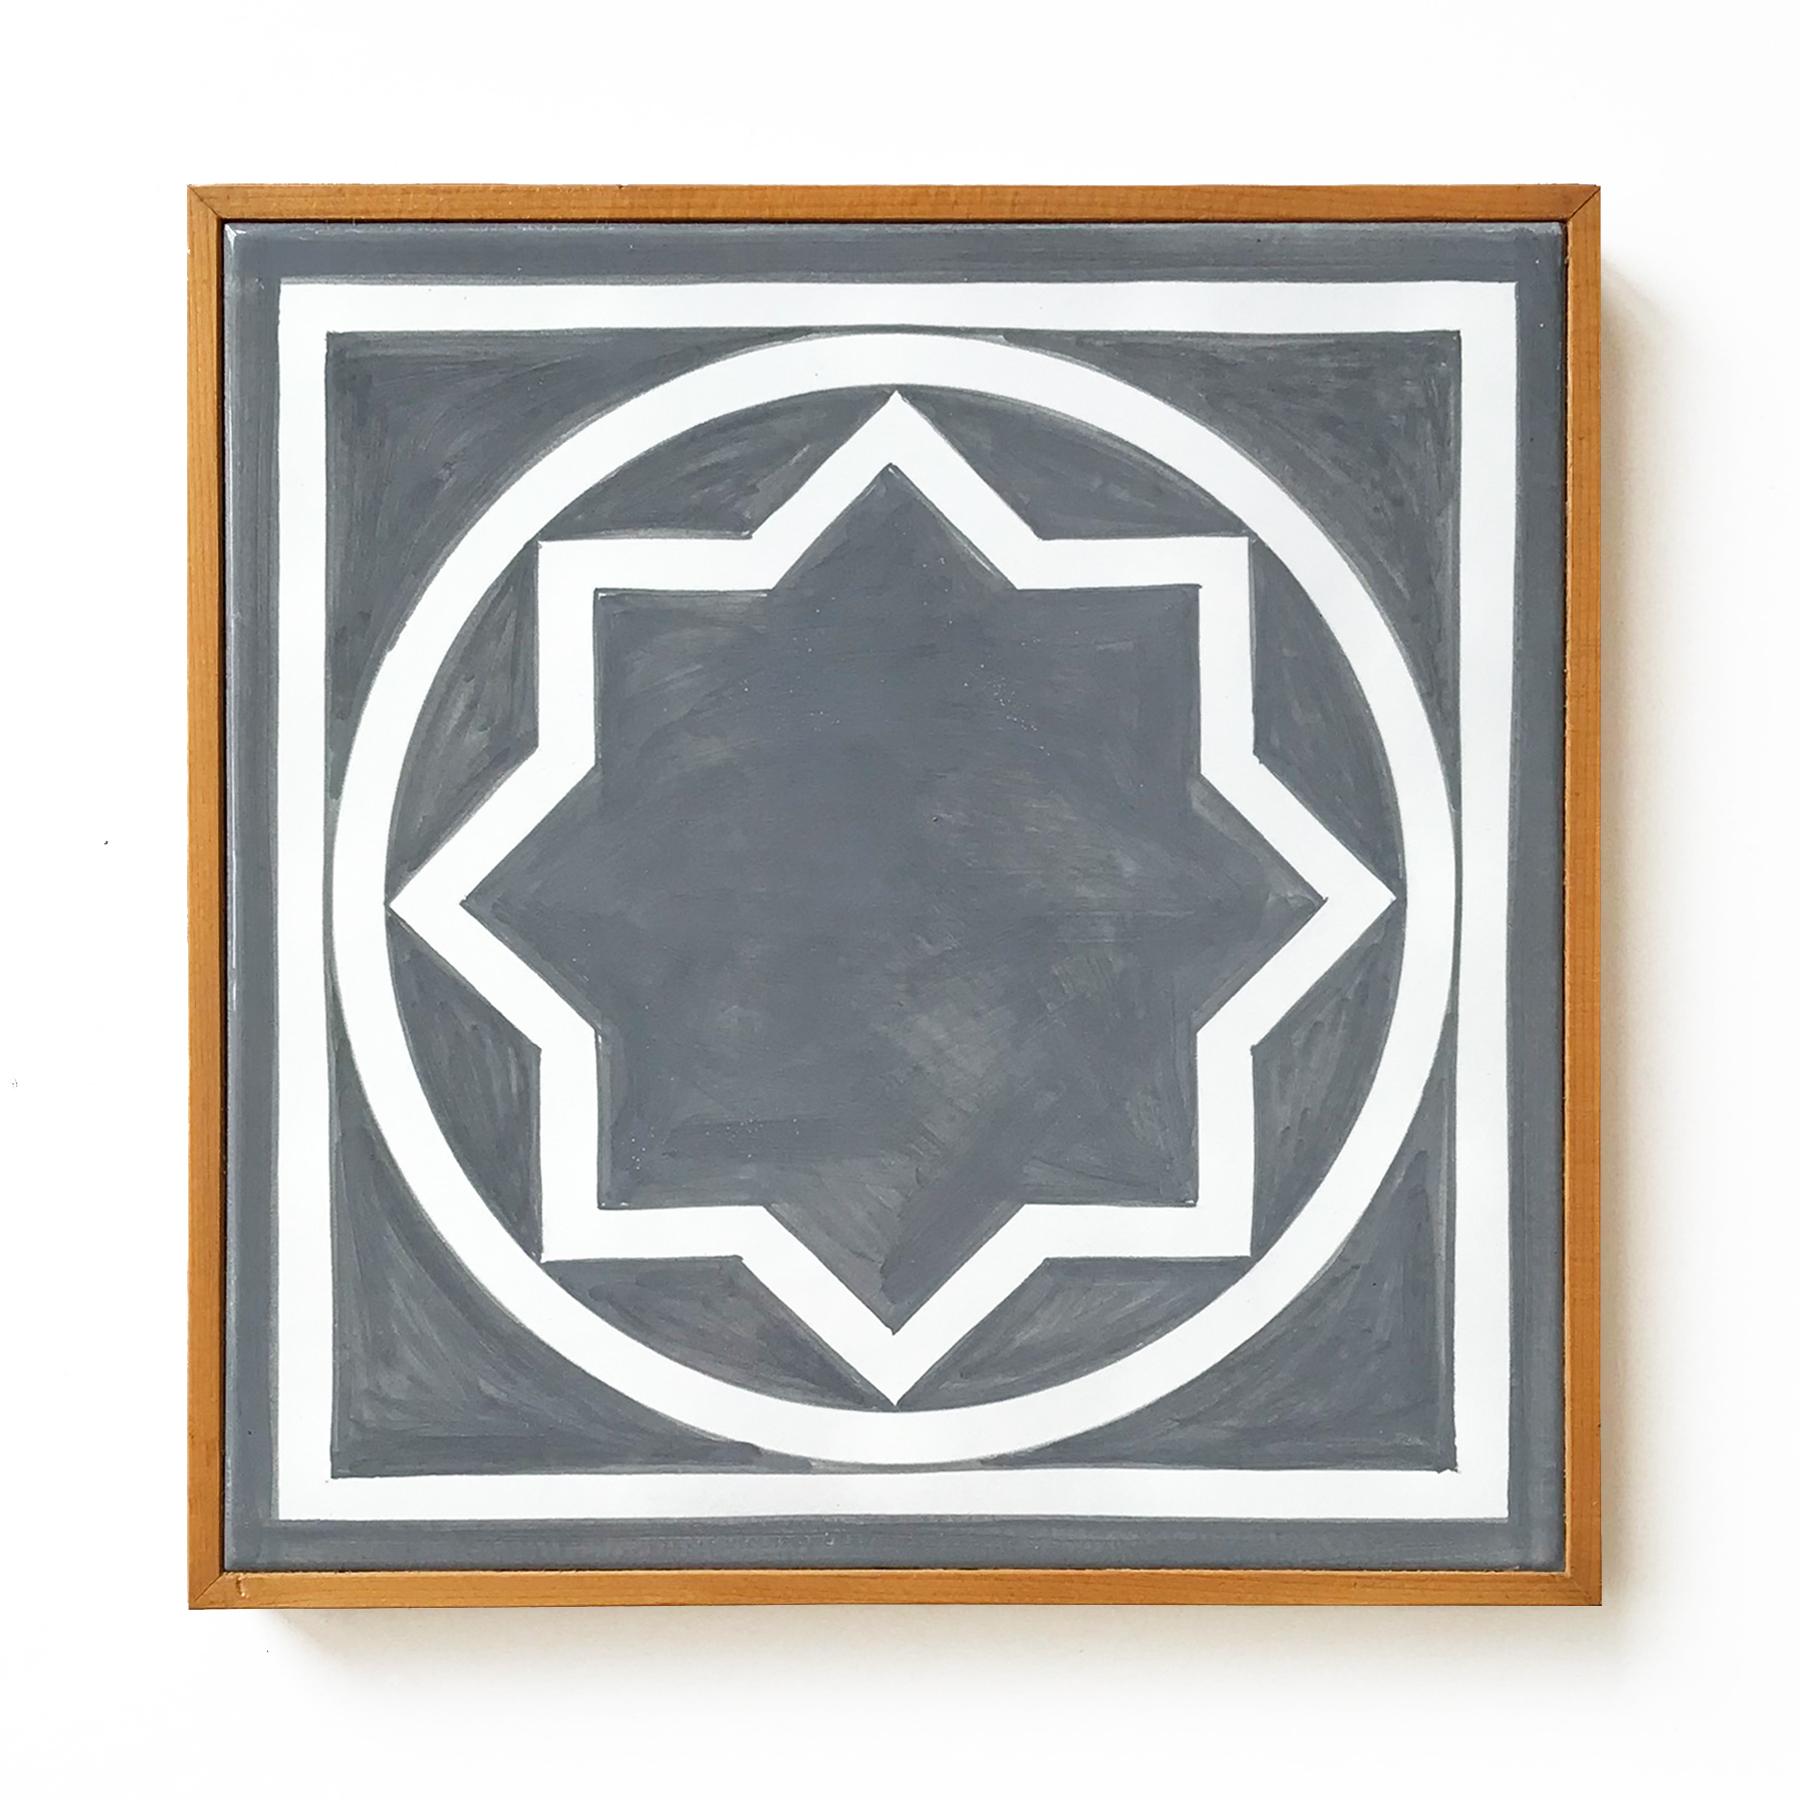 Sol LeWitt Abstract Print - Untitled, Ceramic Wall Tile (Grey), Geometric Abstraction, Minimalism